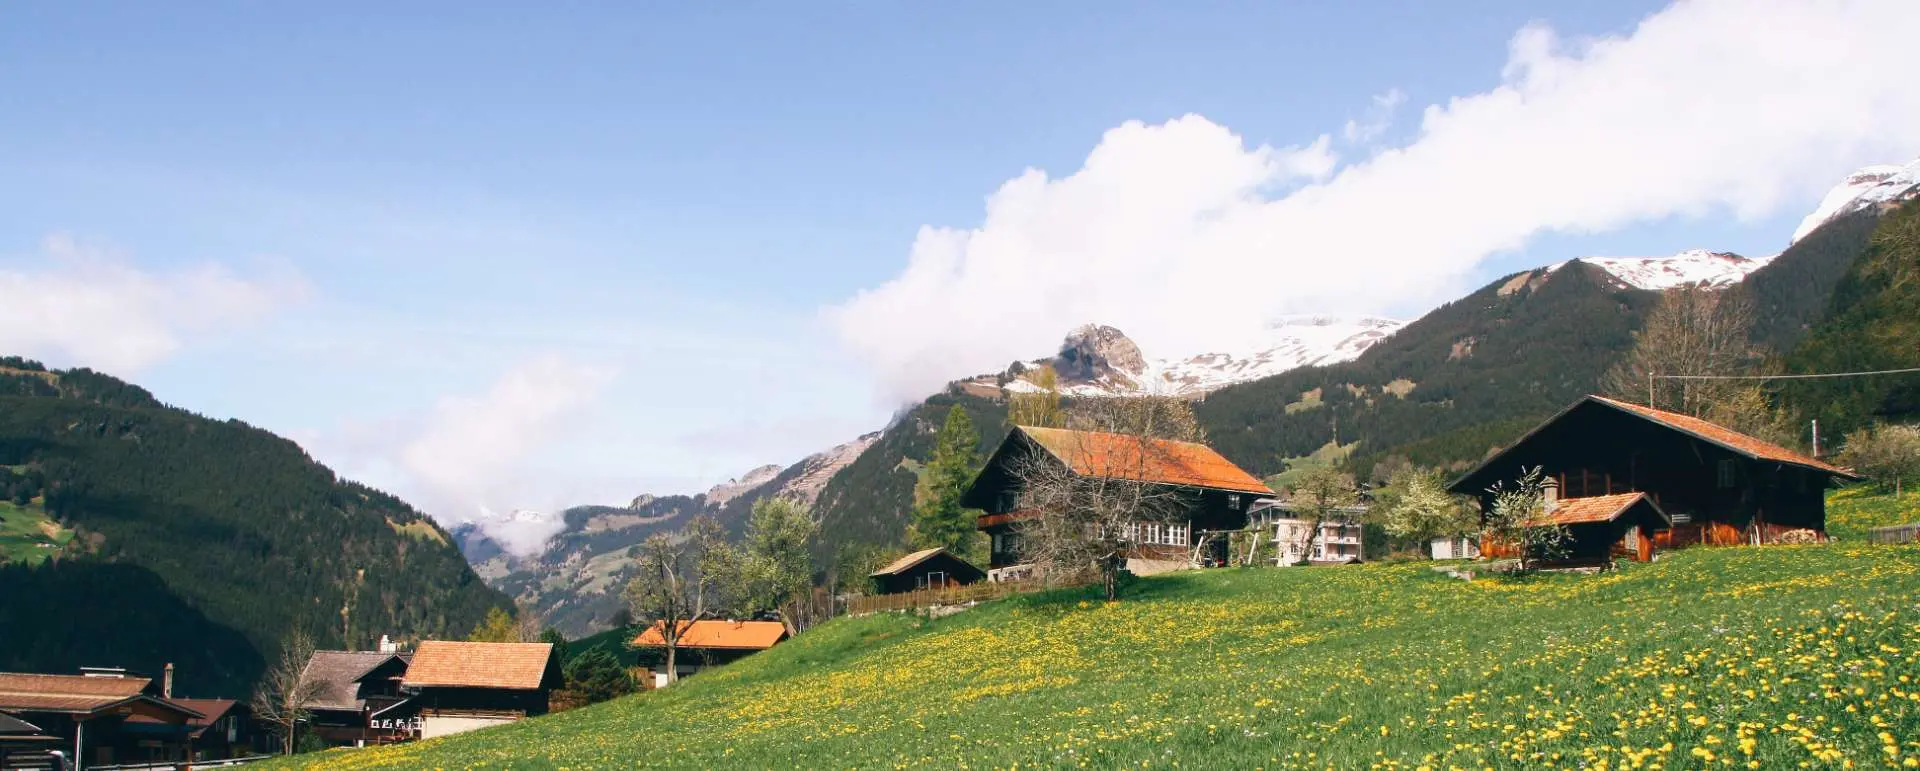 Bernese Highlands - the destination for group accommodations